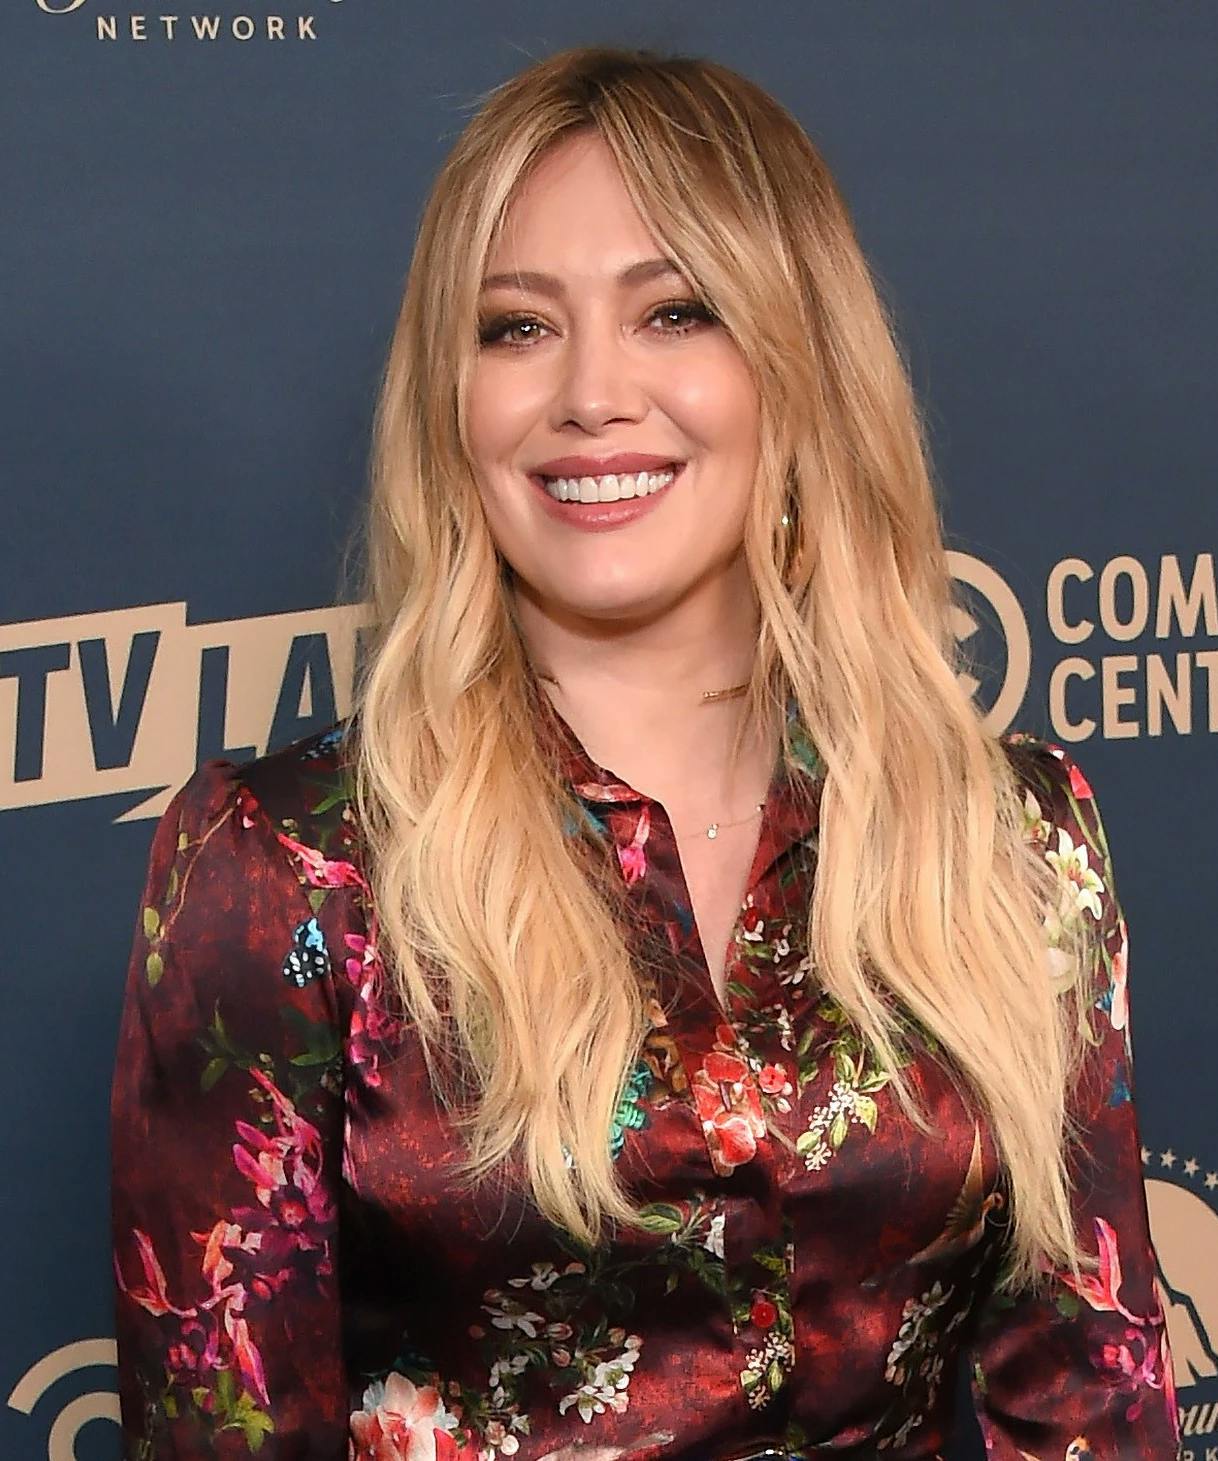 Hilary Duff To Star In Spinoff Series ‘How I Met Your Father’